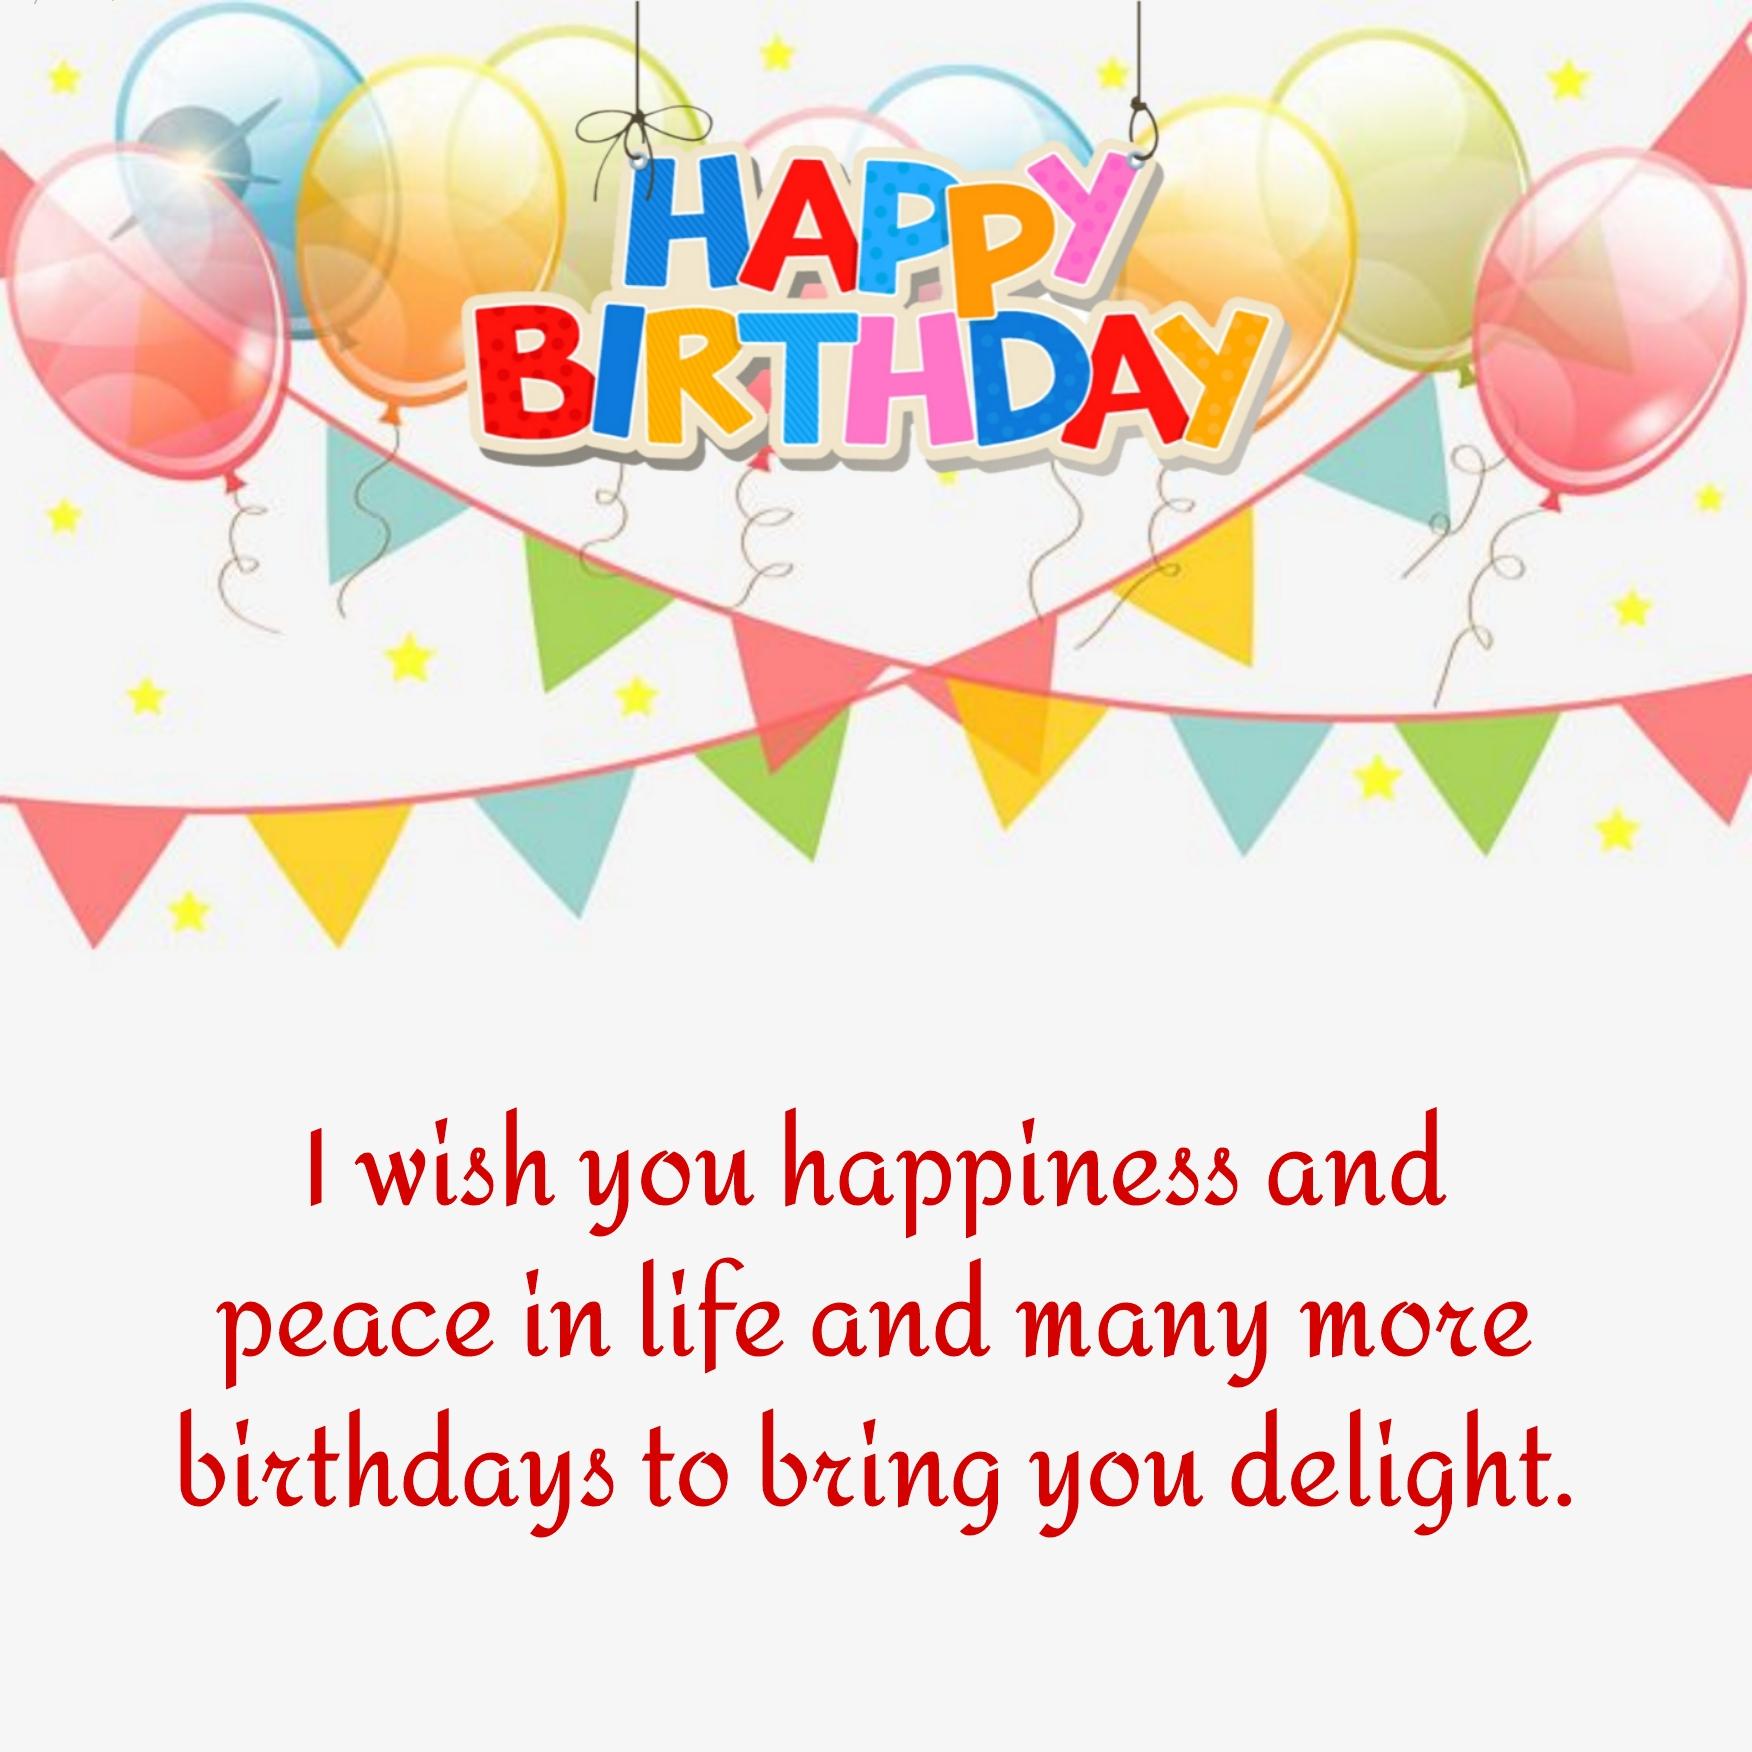 I wish you happiness and peace in life and many more birthdays